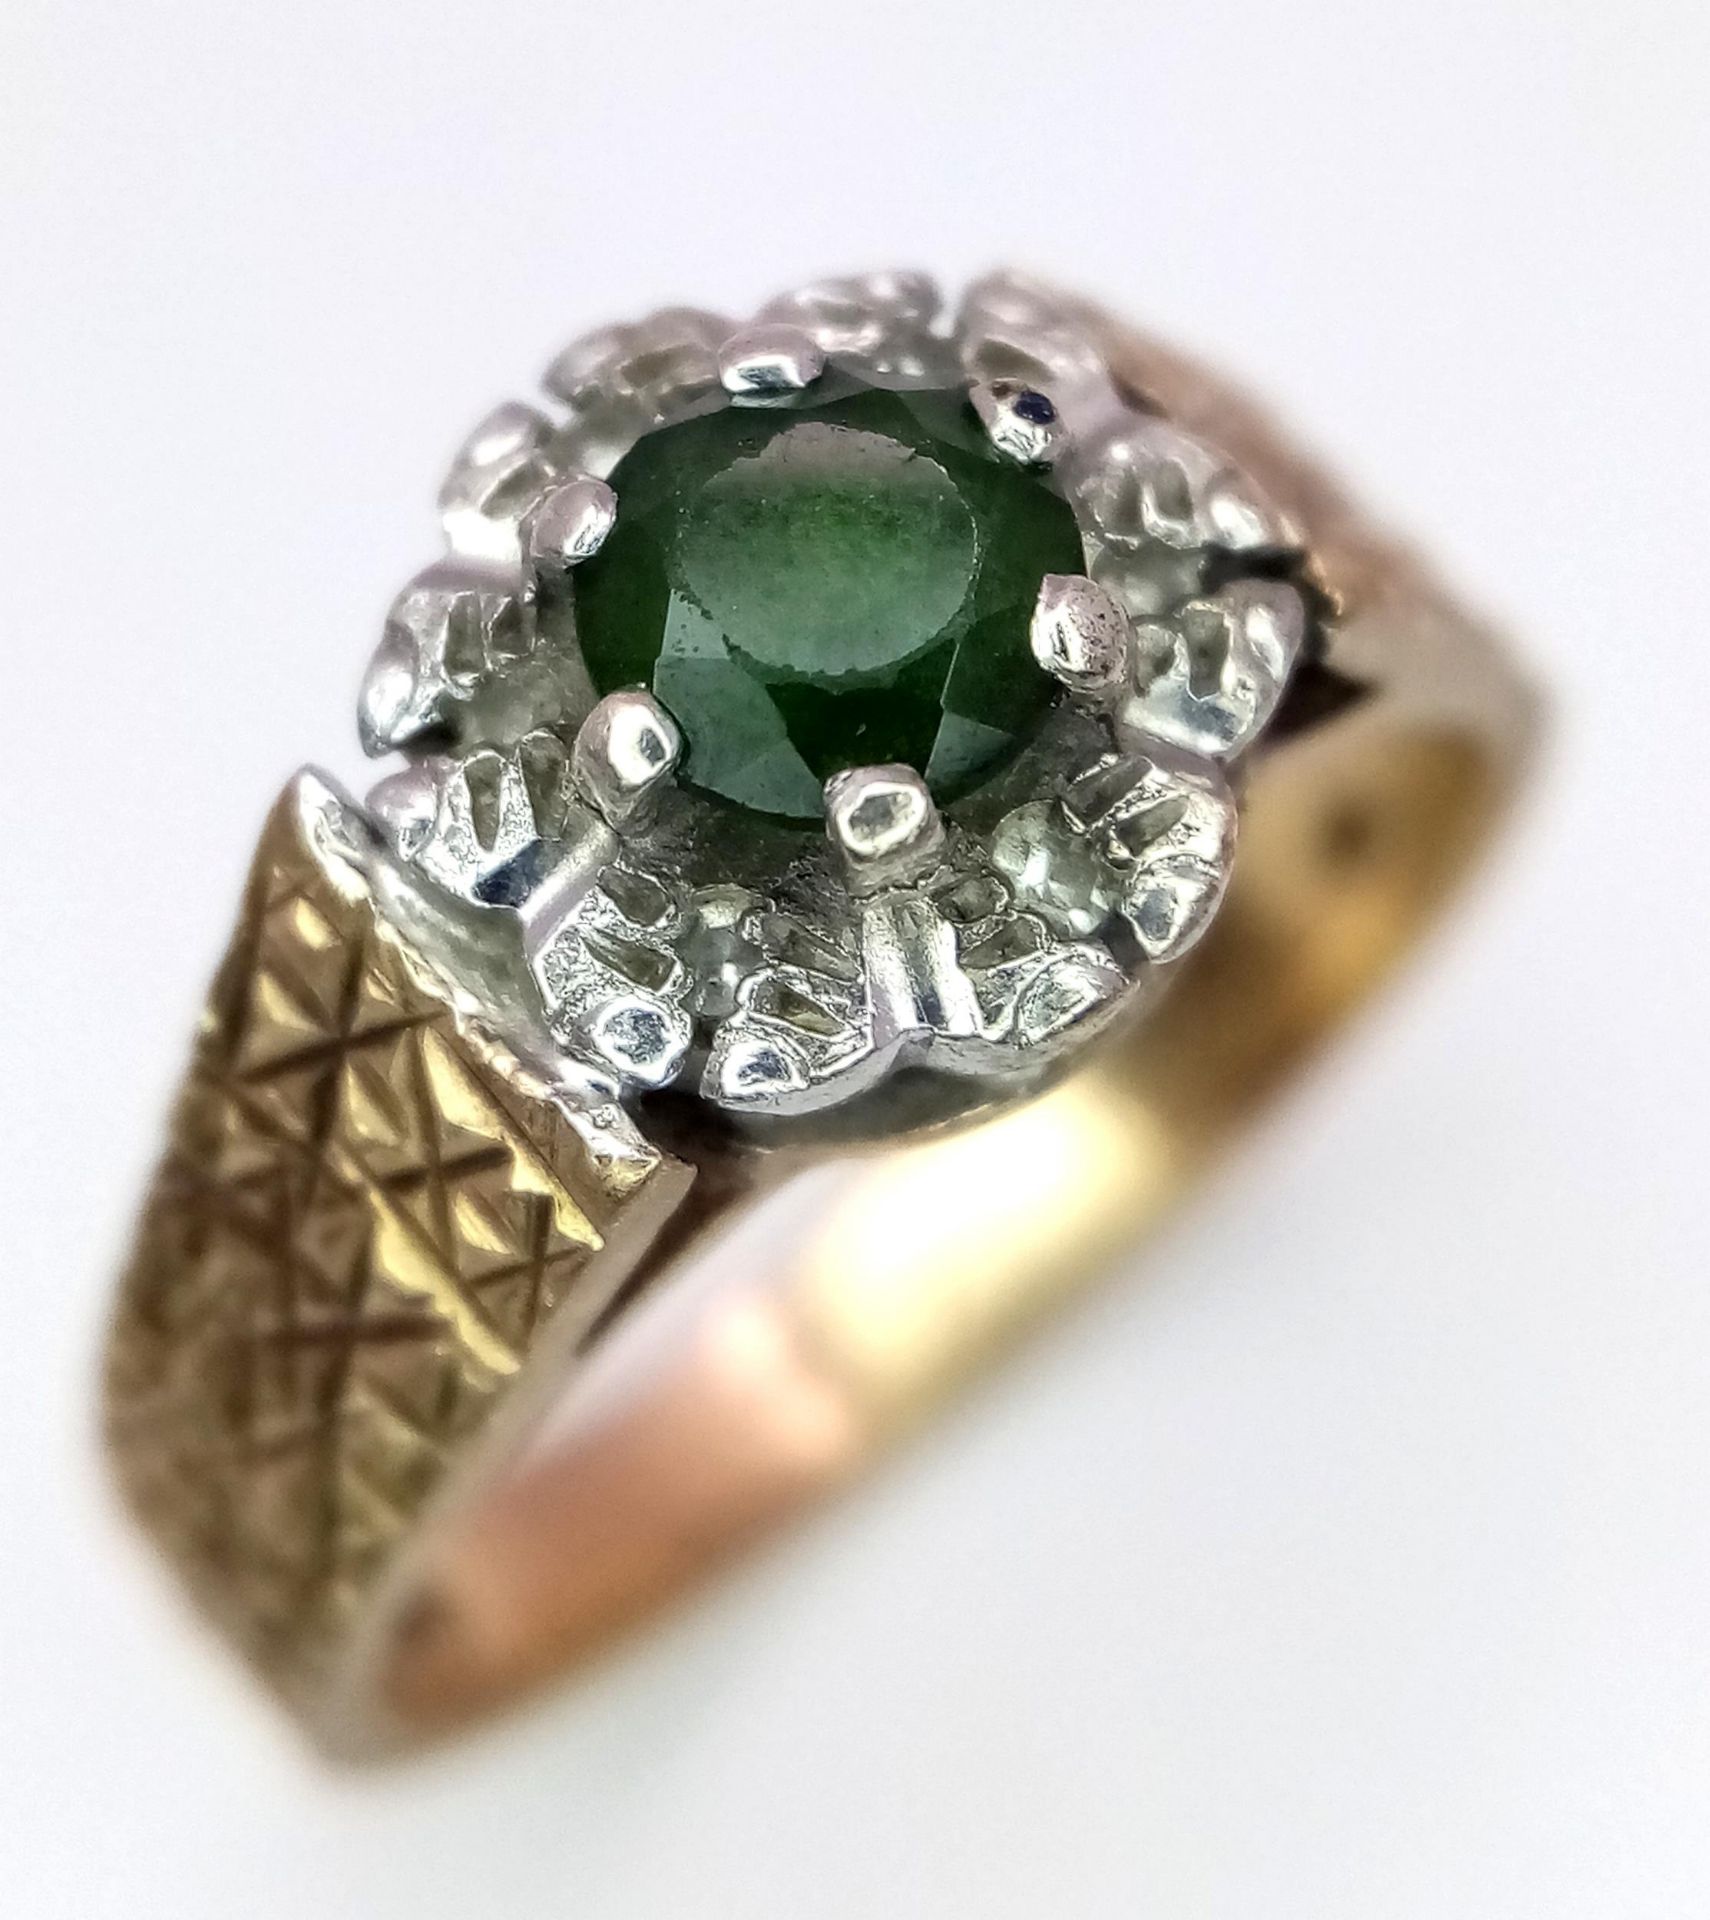 A Vintage 9K Peridot and Diamond Ring. Central round cut peridot with a diamond halo. Size L. 3.4g